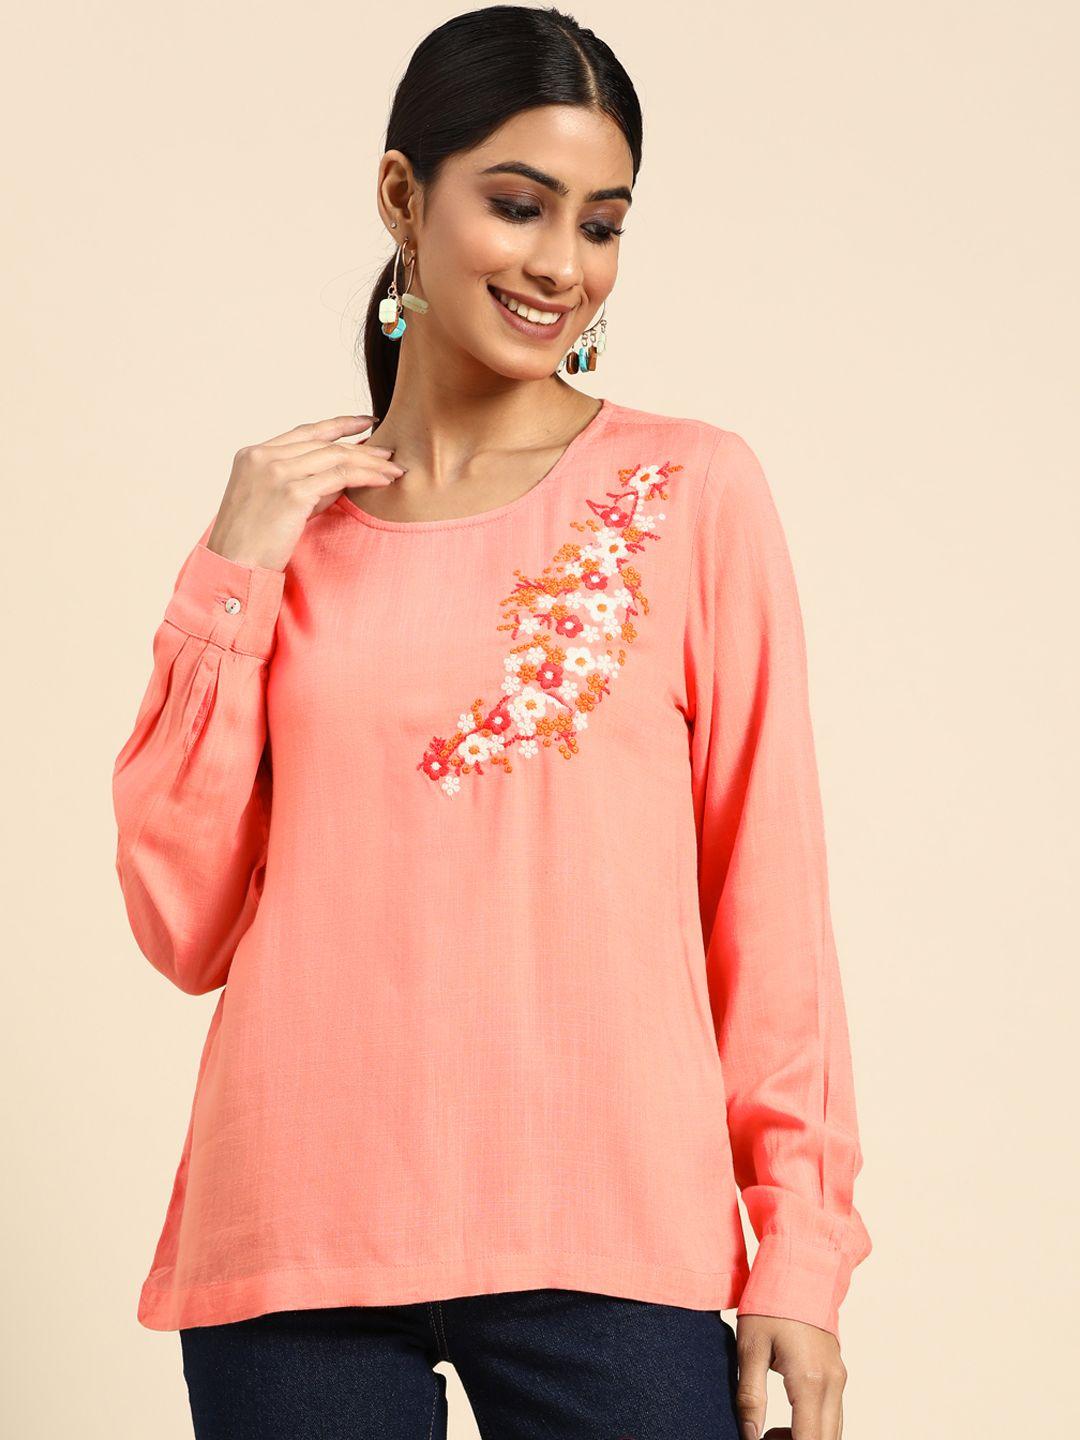 sangria peach-coloured embroidered top